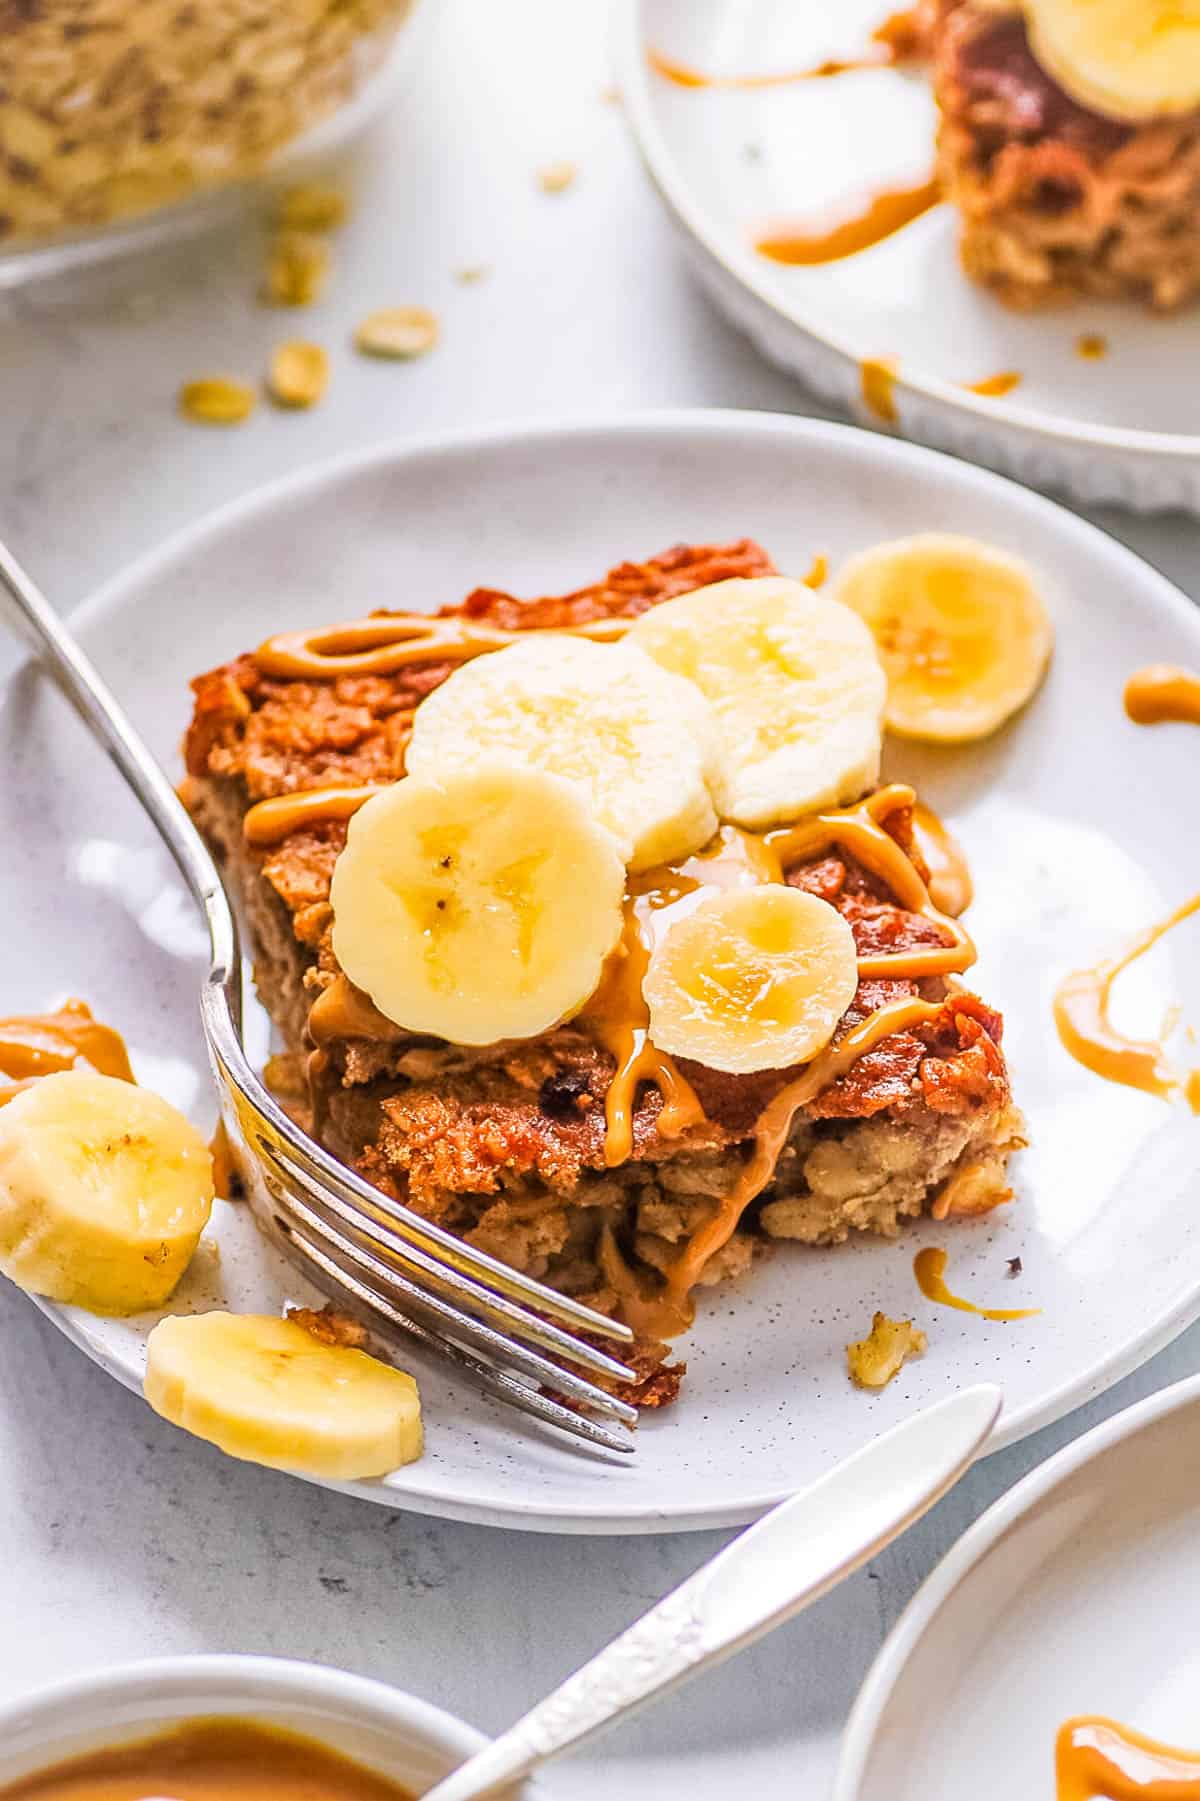 One slice of banana peanut butter baked oatmeal, garnished with banana slices, served on a white plate with a fork.